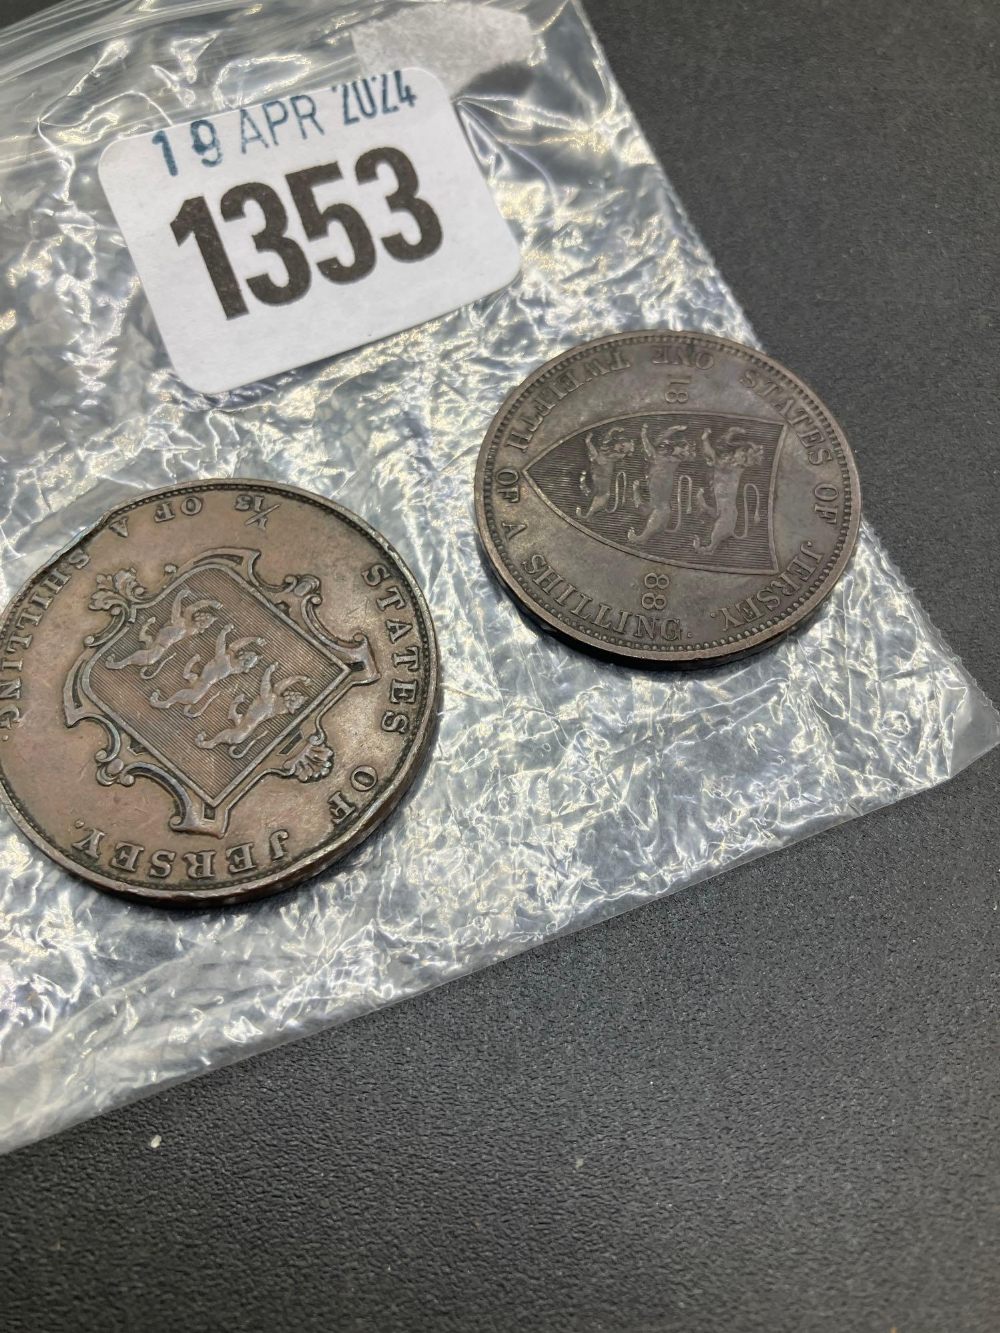 Jersey third of a shilling 1858 & 1888 penny - Image 2 of 2